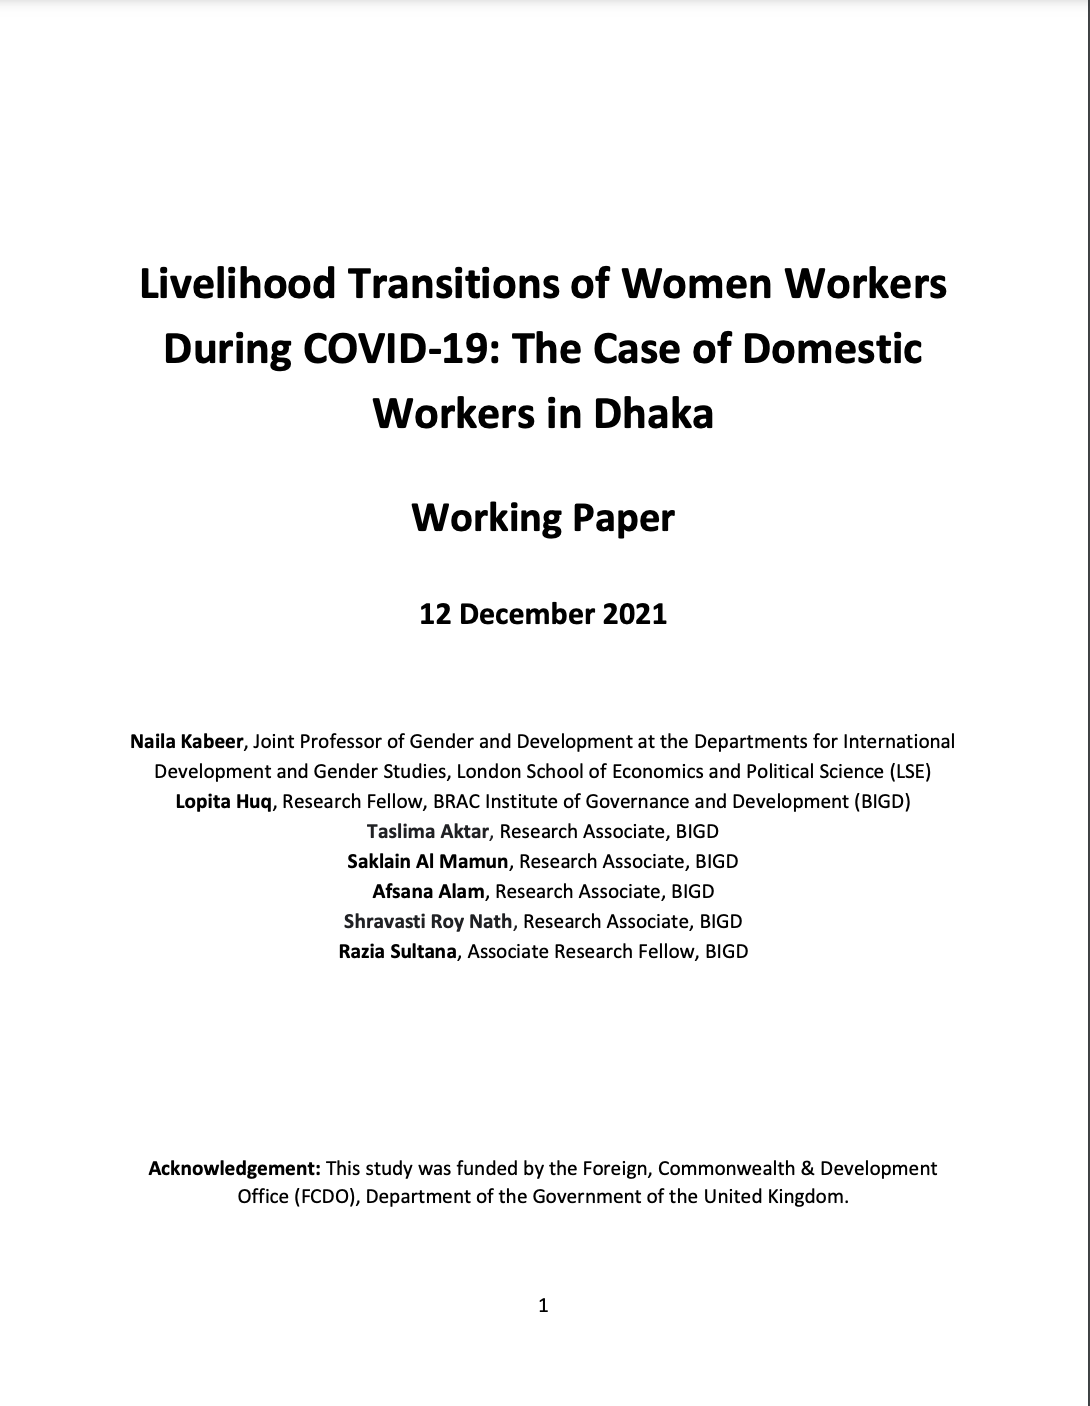 Livelihood Transitions of Women Workers During COVID-19: Domestic Workers in Dhaka